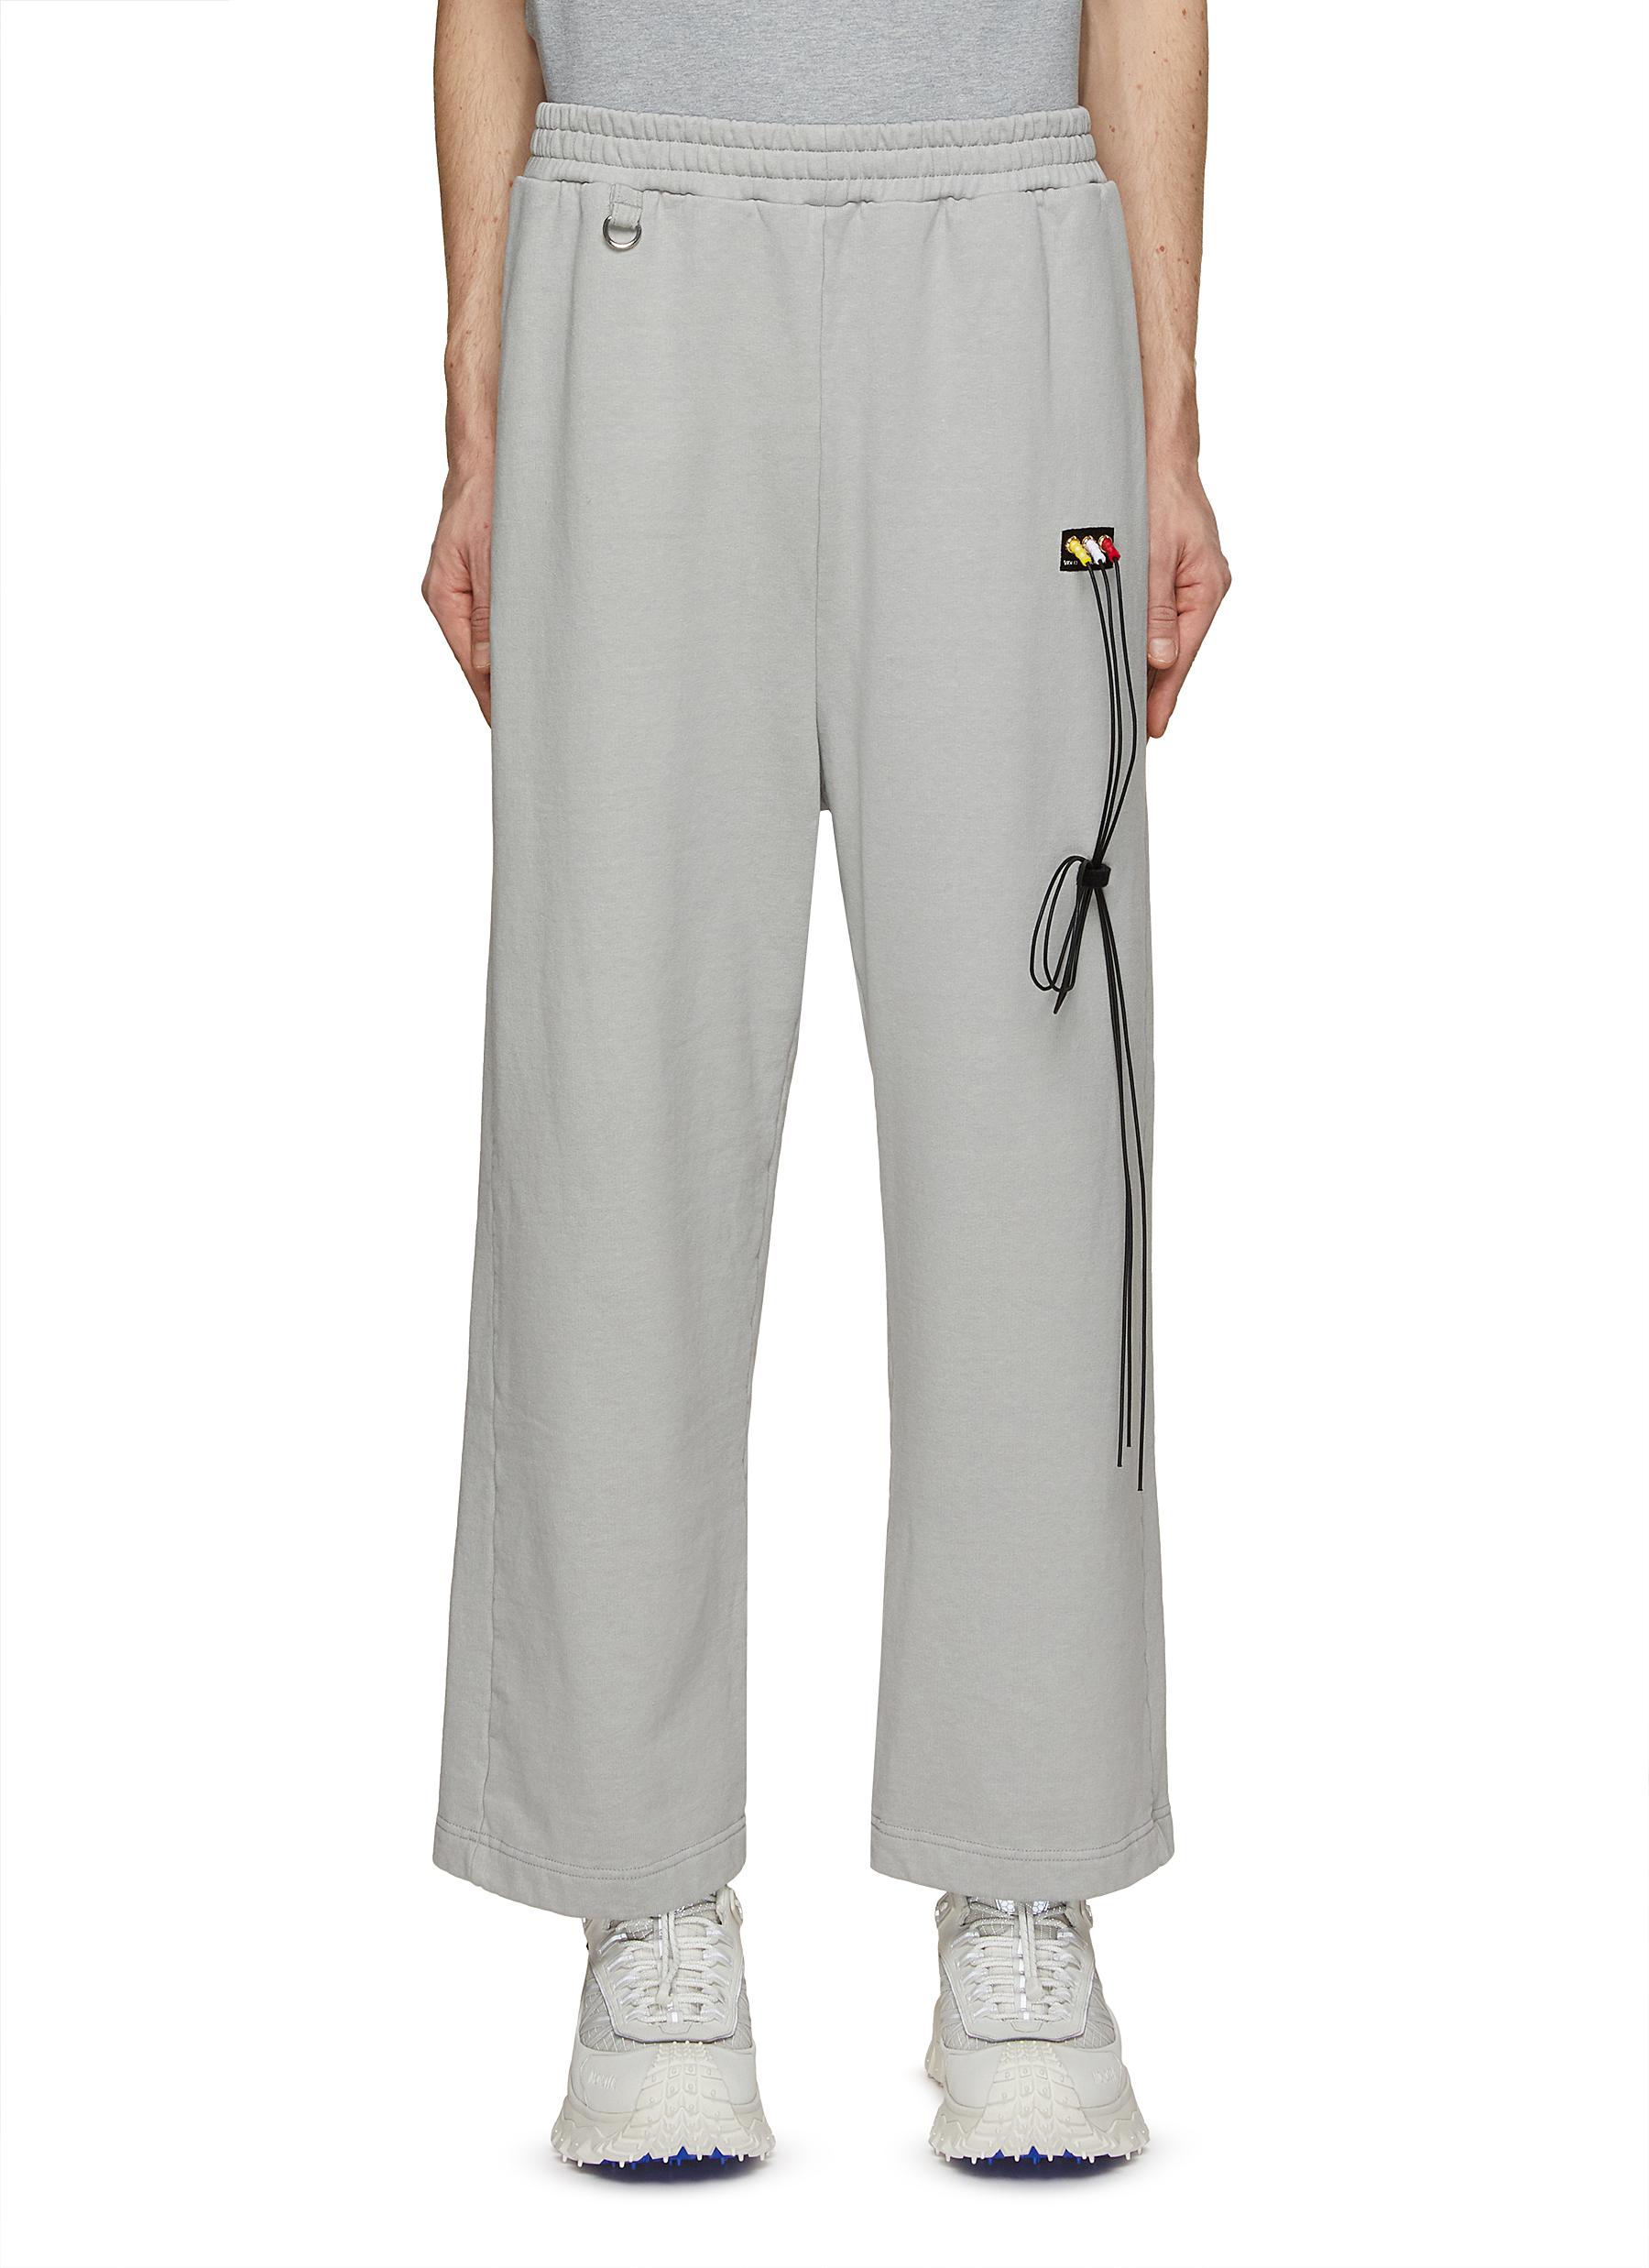 DOUBLET, Embroidered Cable Sweatpants, Men